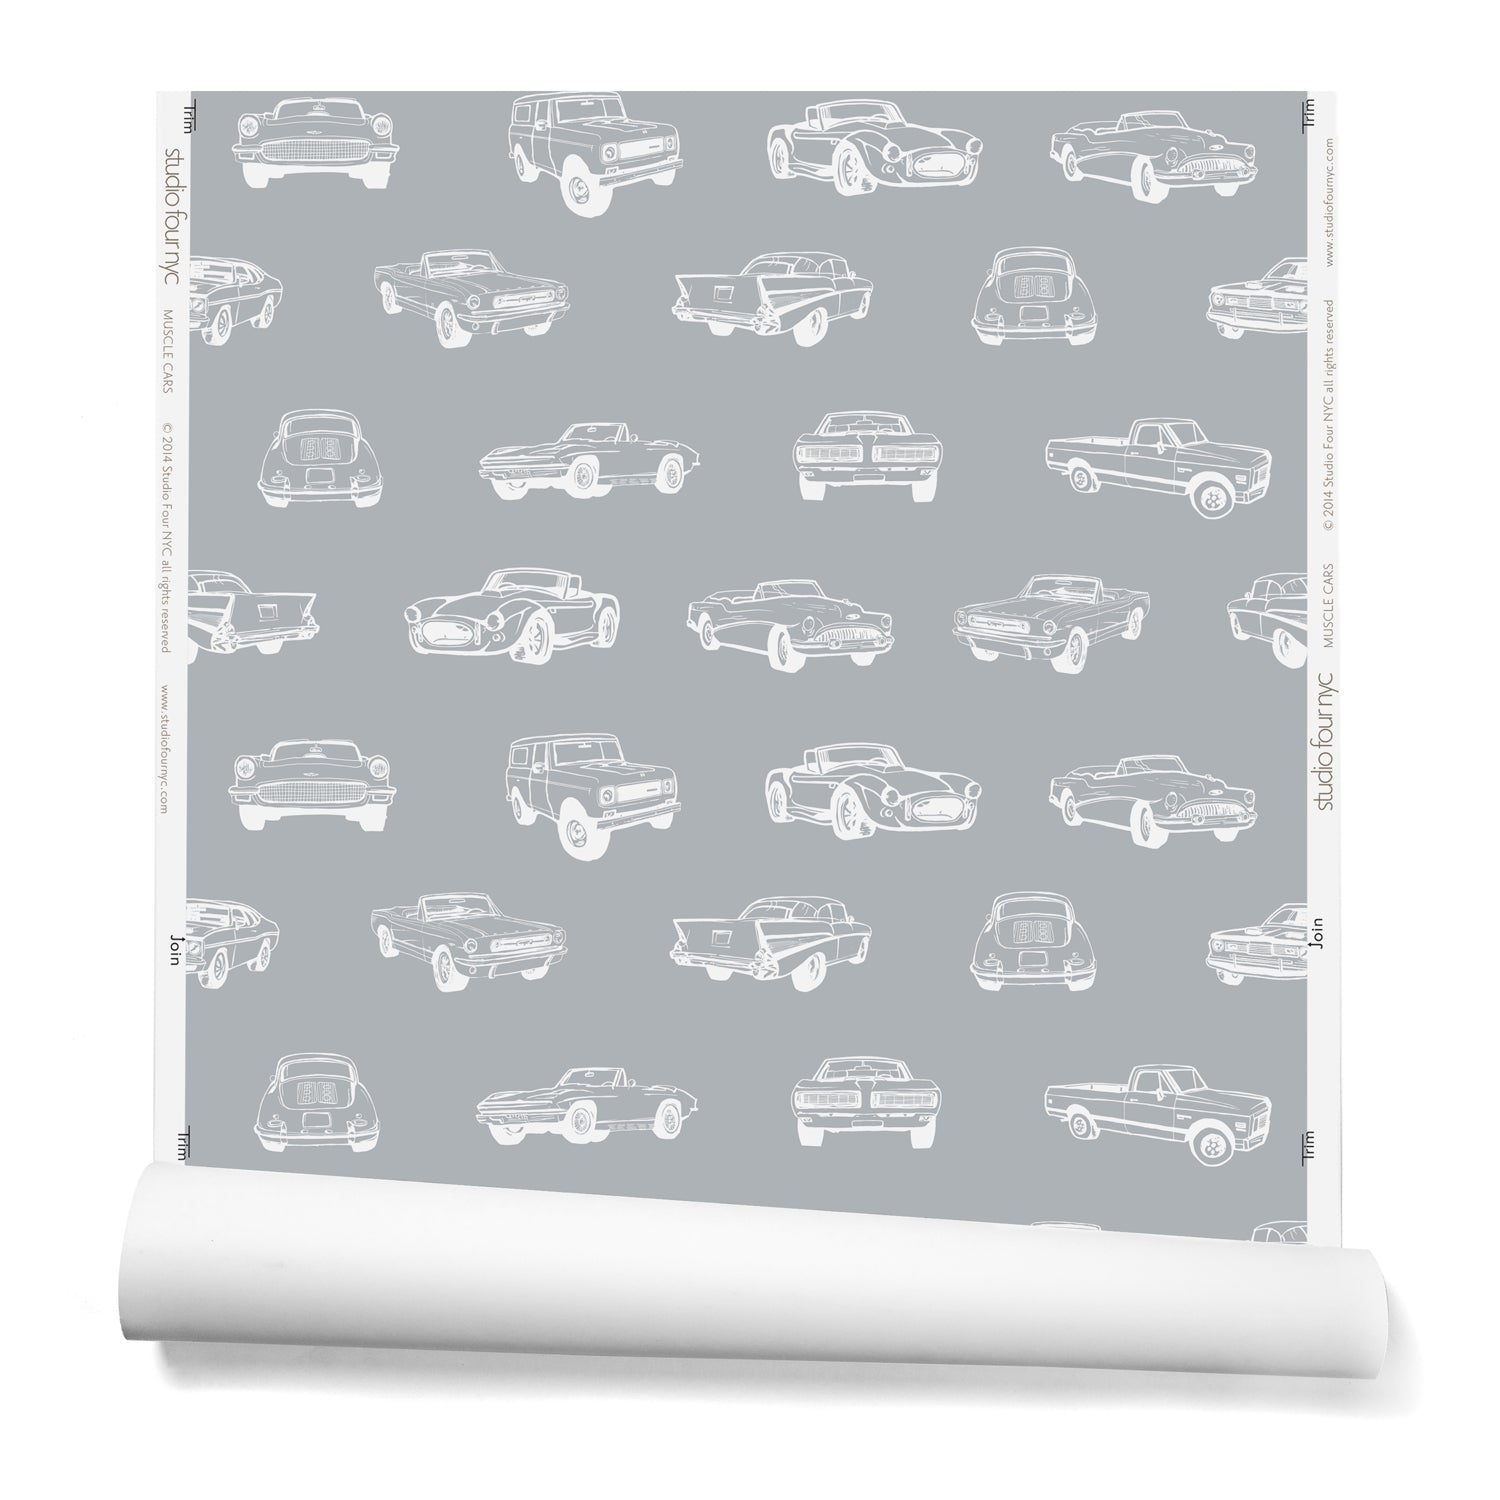 A roll of wallpaper with a linear pattern of illustrated retro cars in white on a gray background.